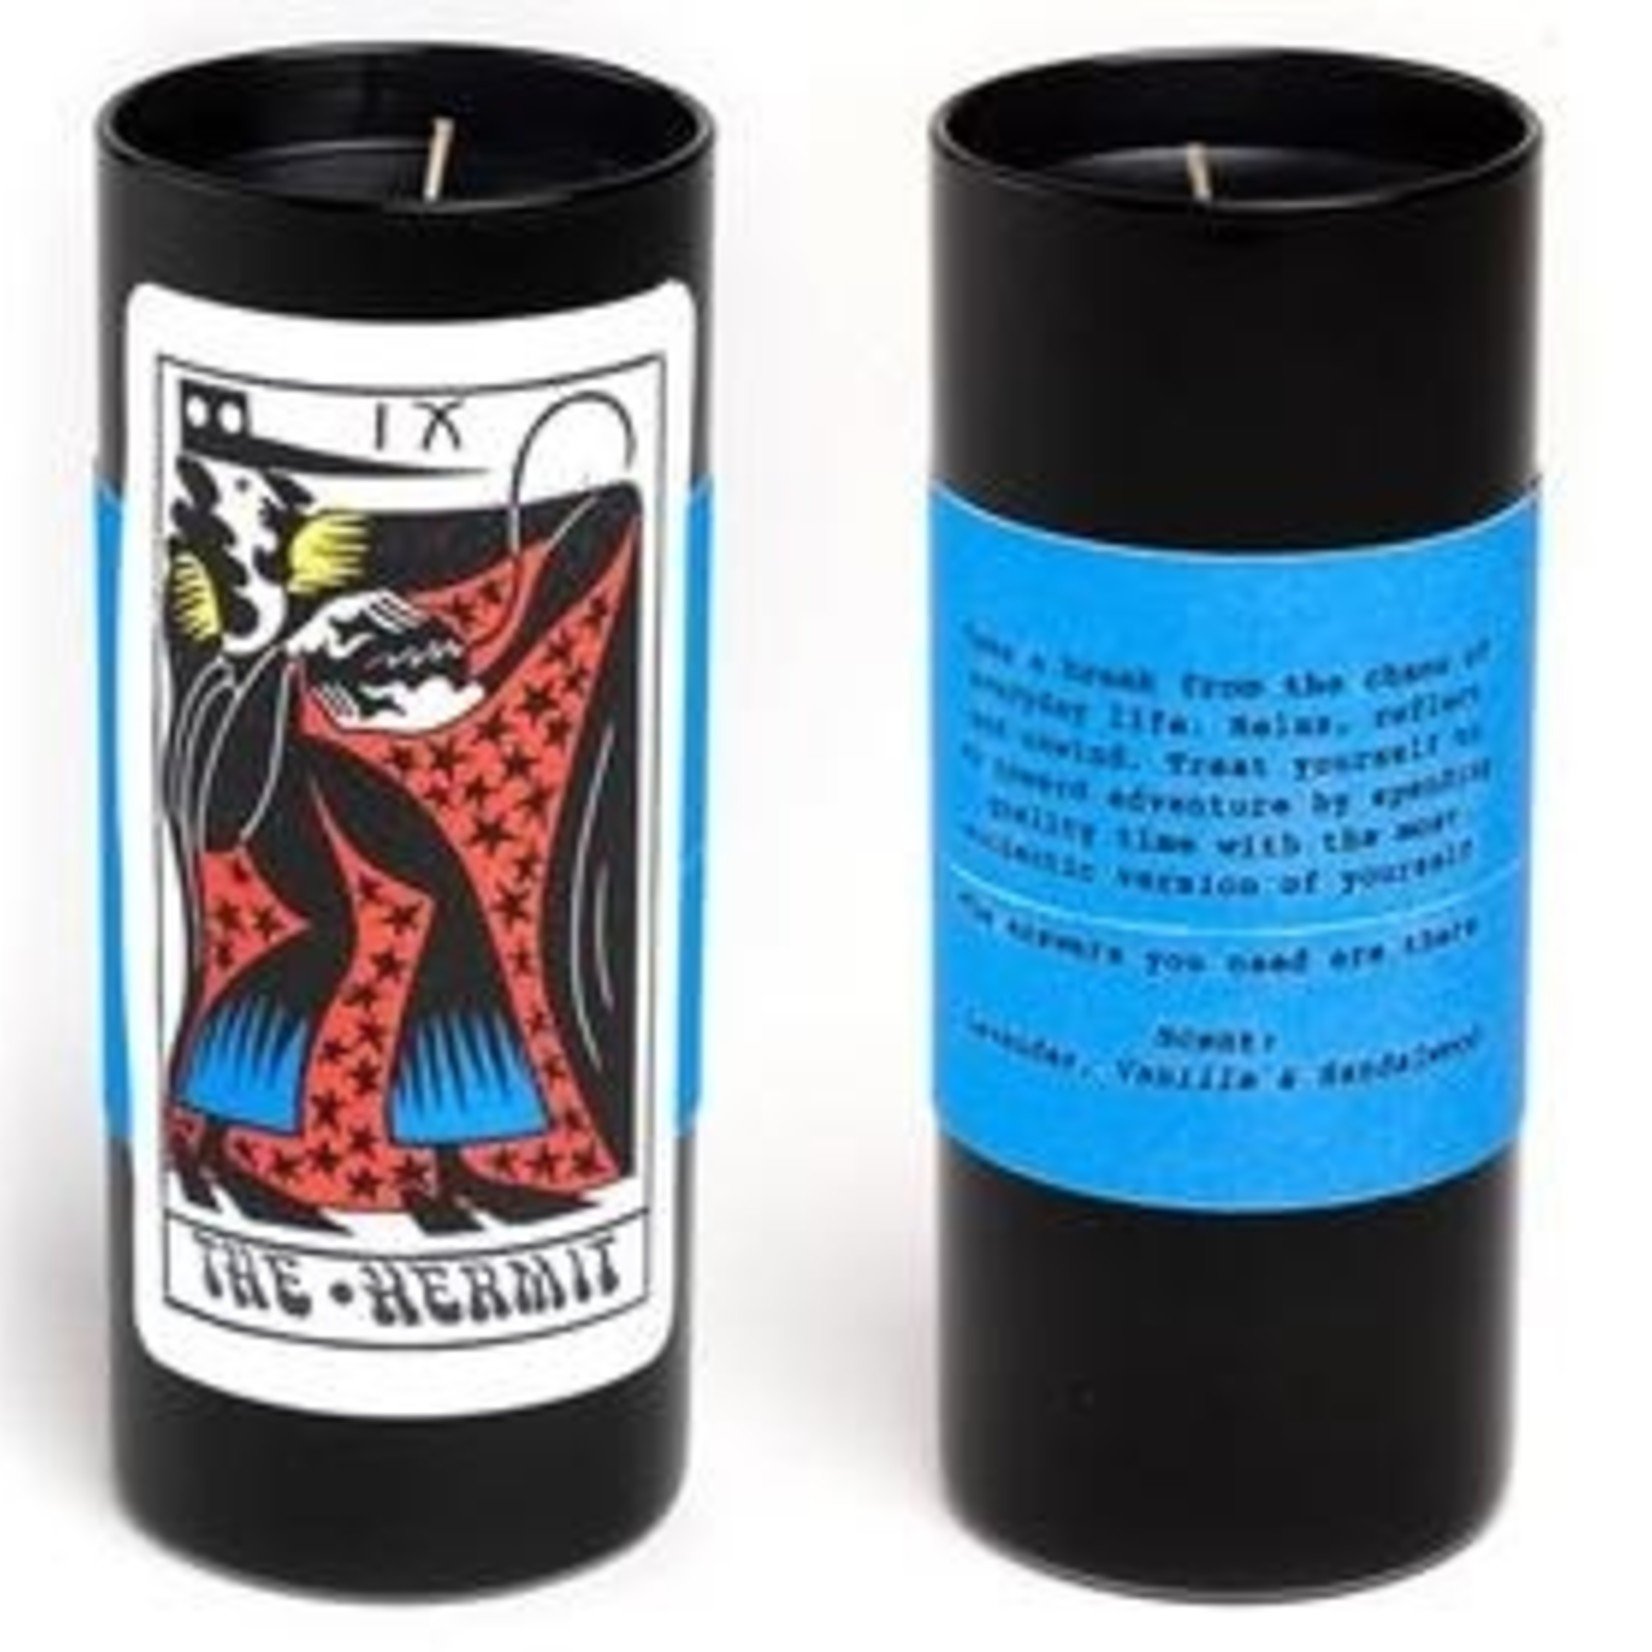 54 Celsius Tarot Candle: The Hermit